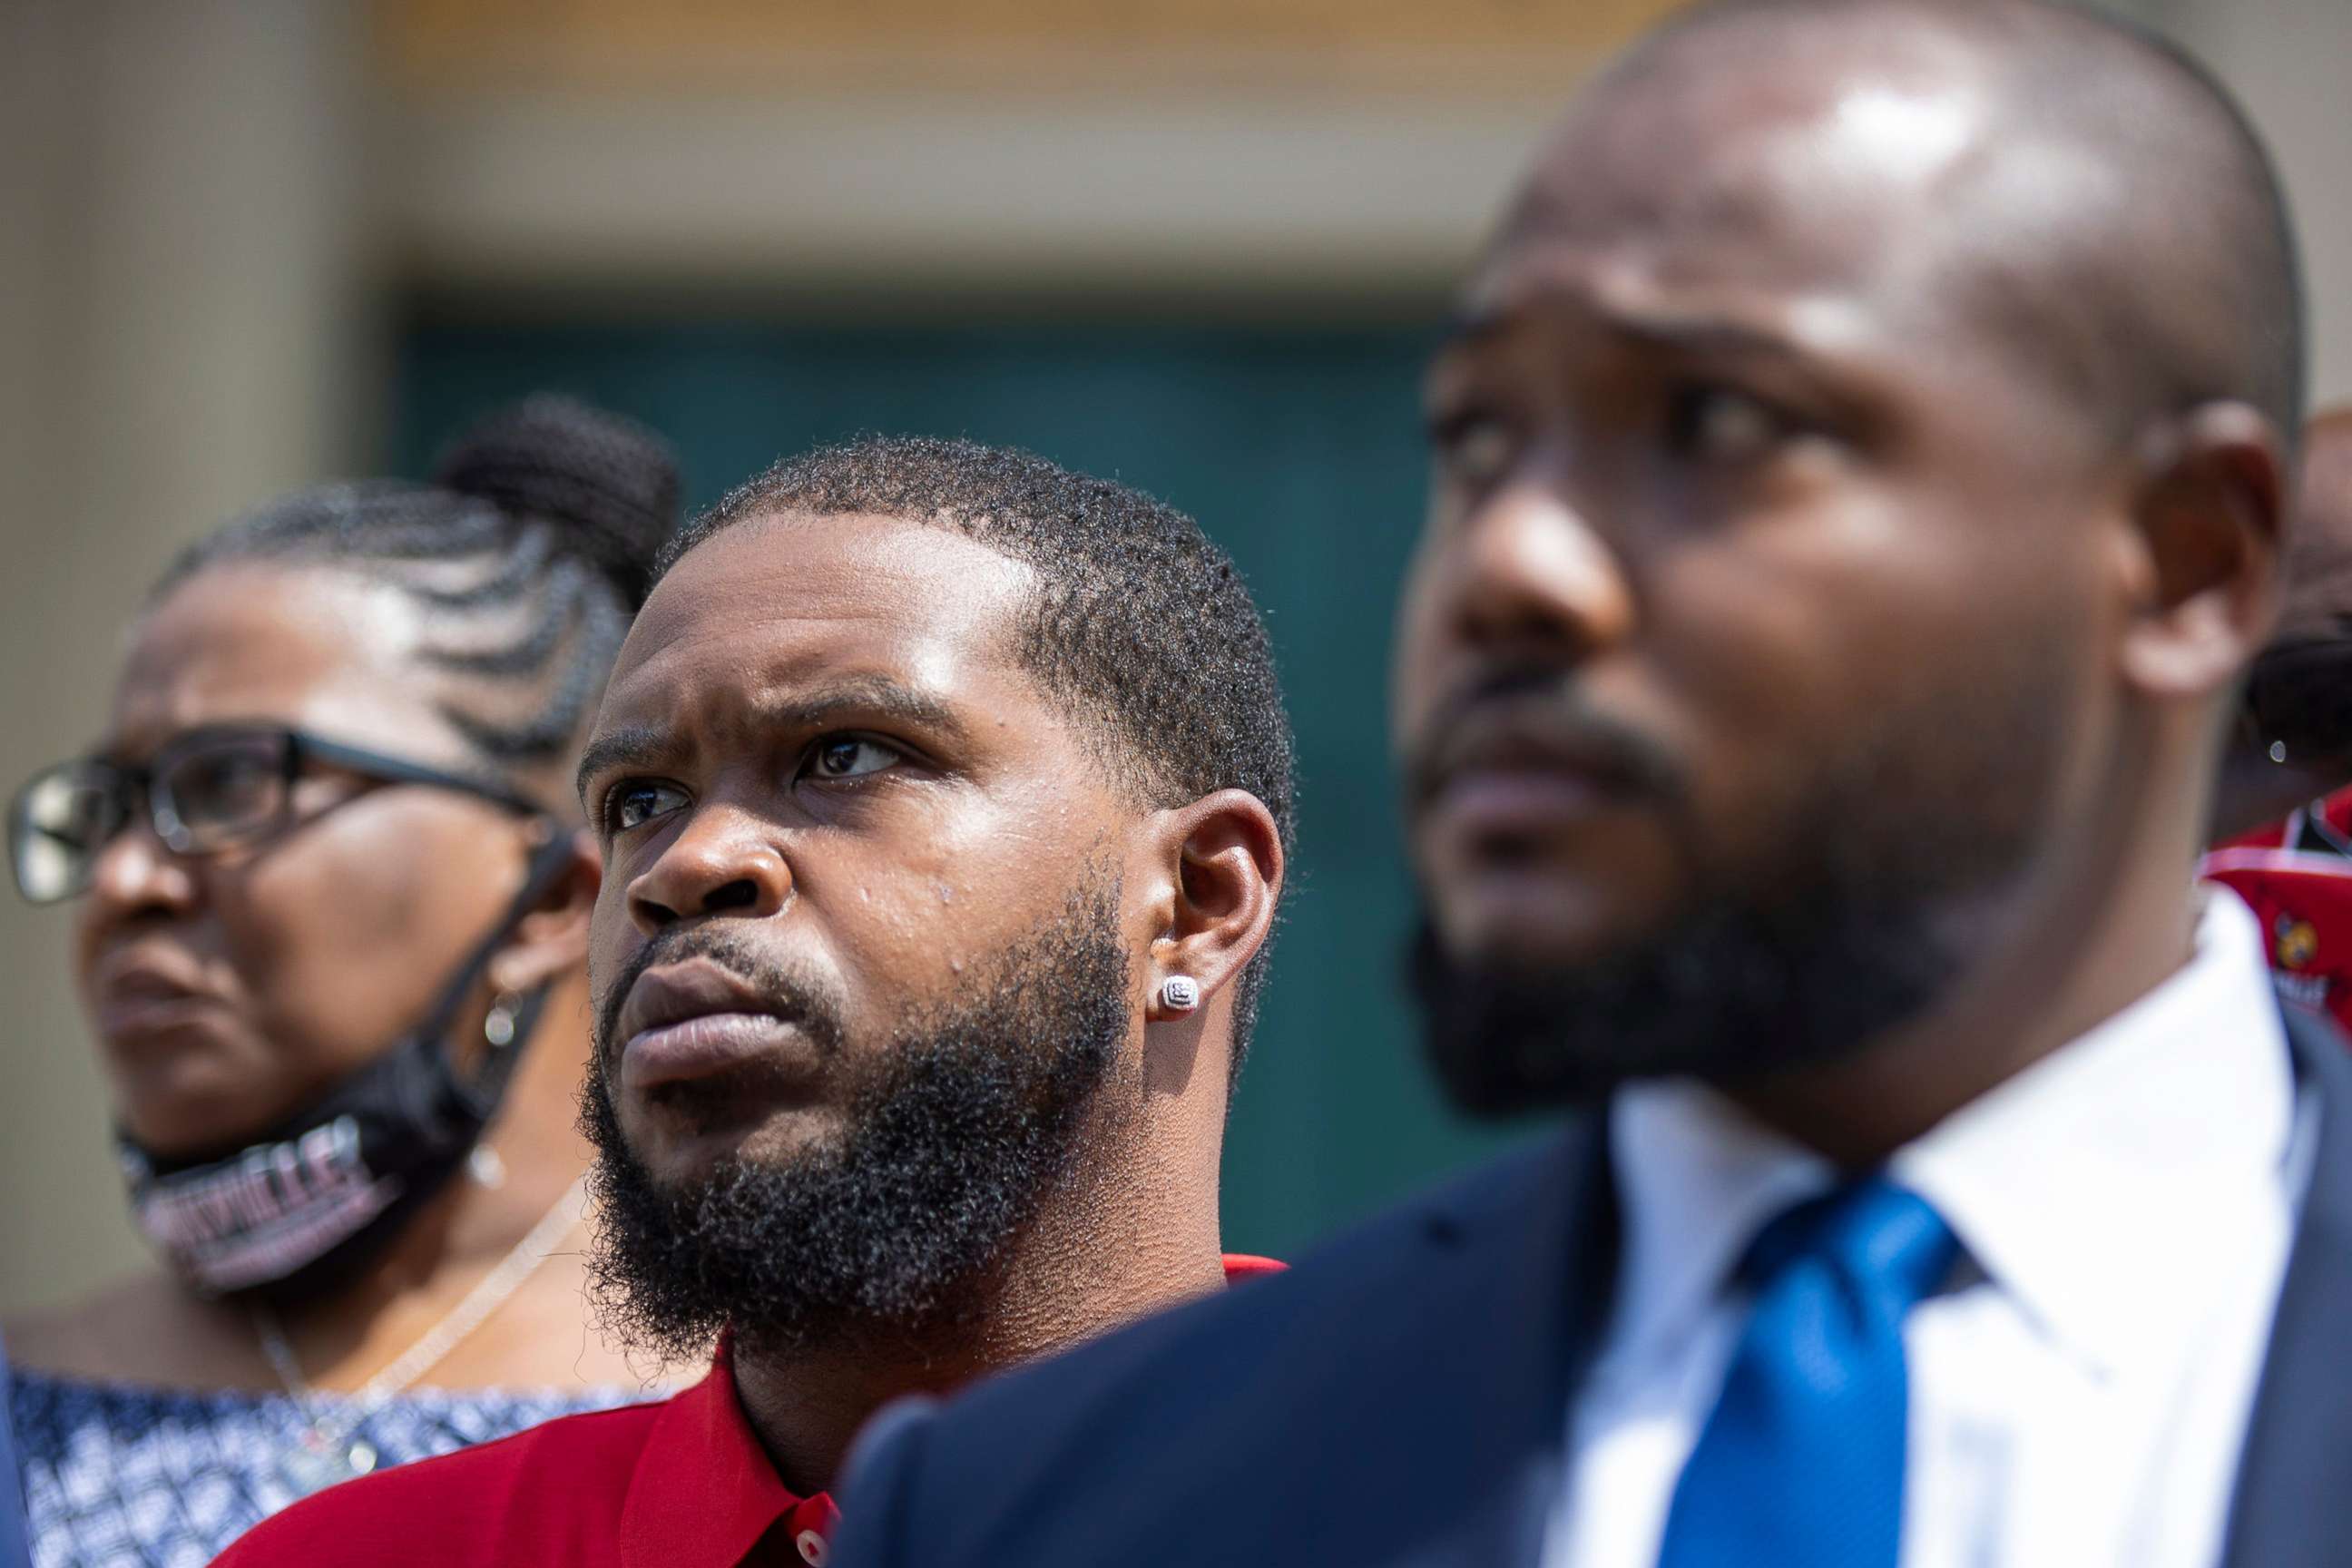 PHOTO: Kenneth Walker, the boyfriend of the late Breonna Taylor, stands between his mother and attorney during a press conference in Louisville, Ky., Sept. 1, 2020.